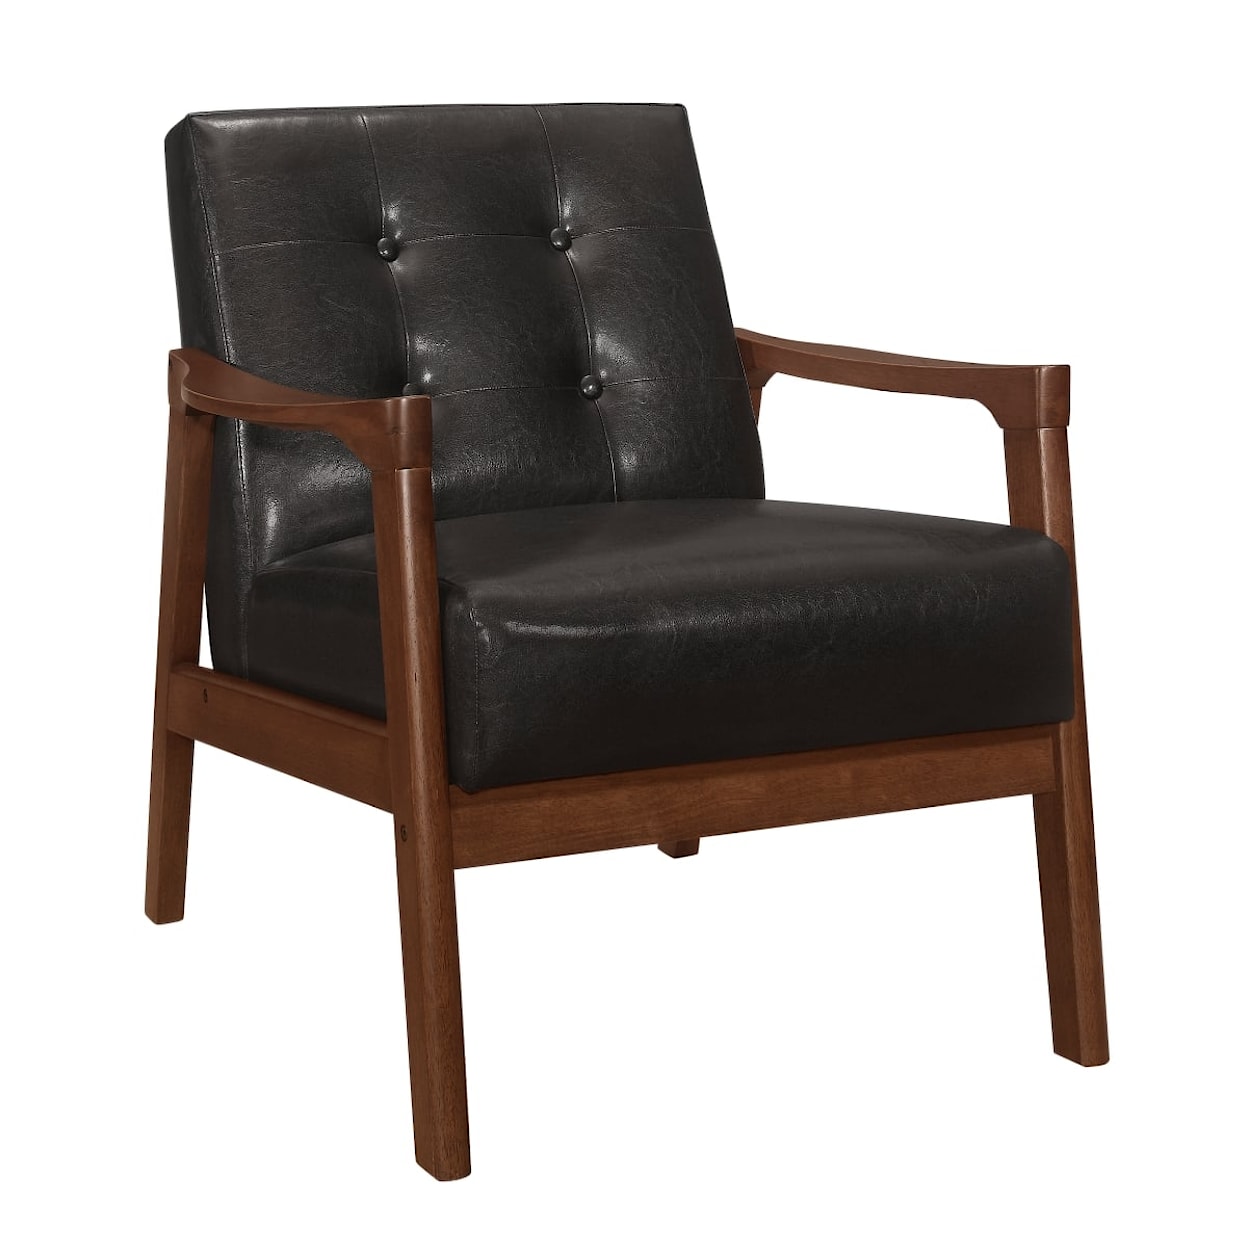 Homelegance Alby Accent Chair with Button Tufting